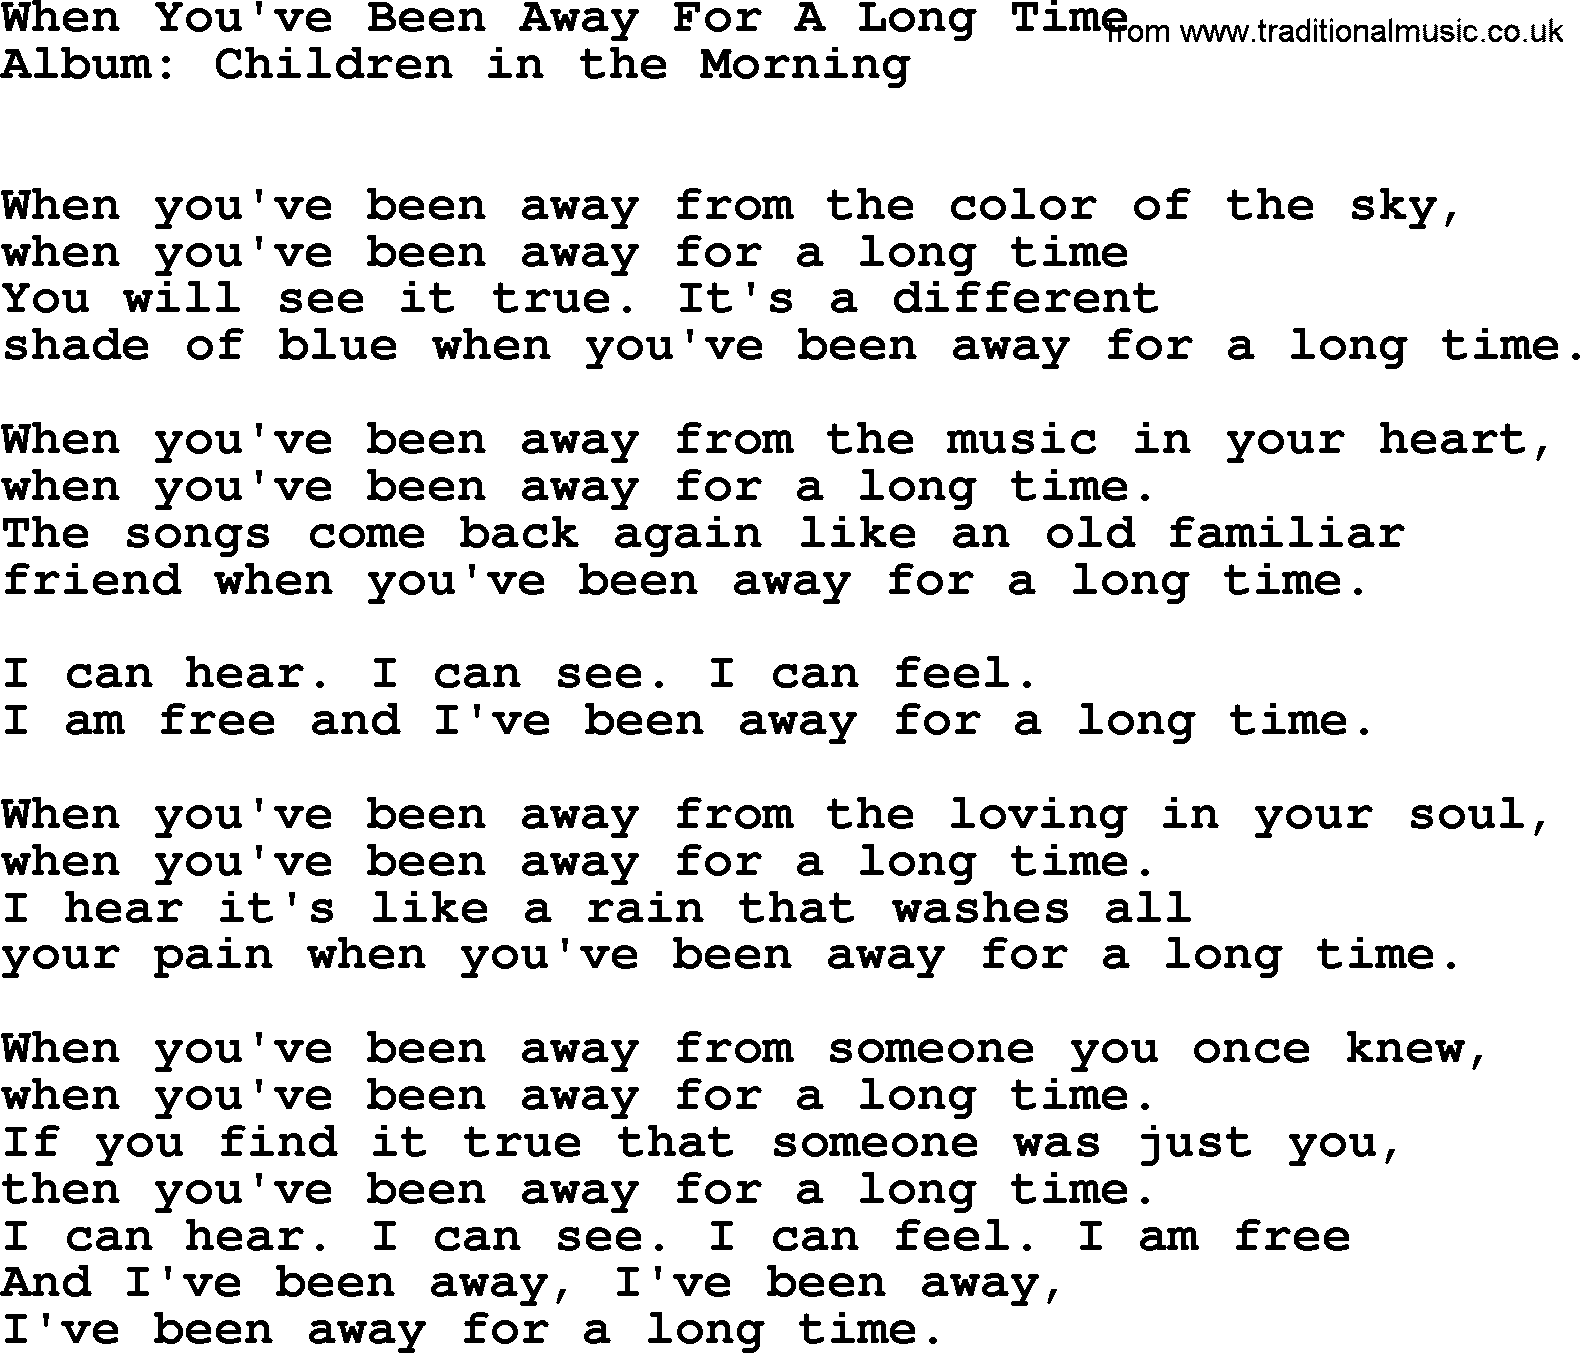 Kingston Trio song When You've Been Away For A Long Time, lyrics